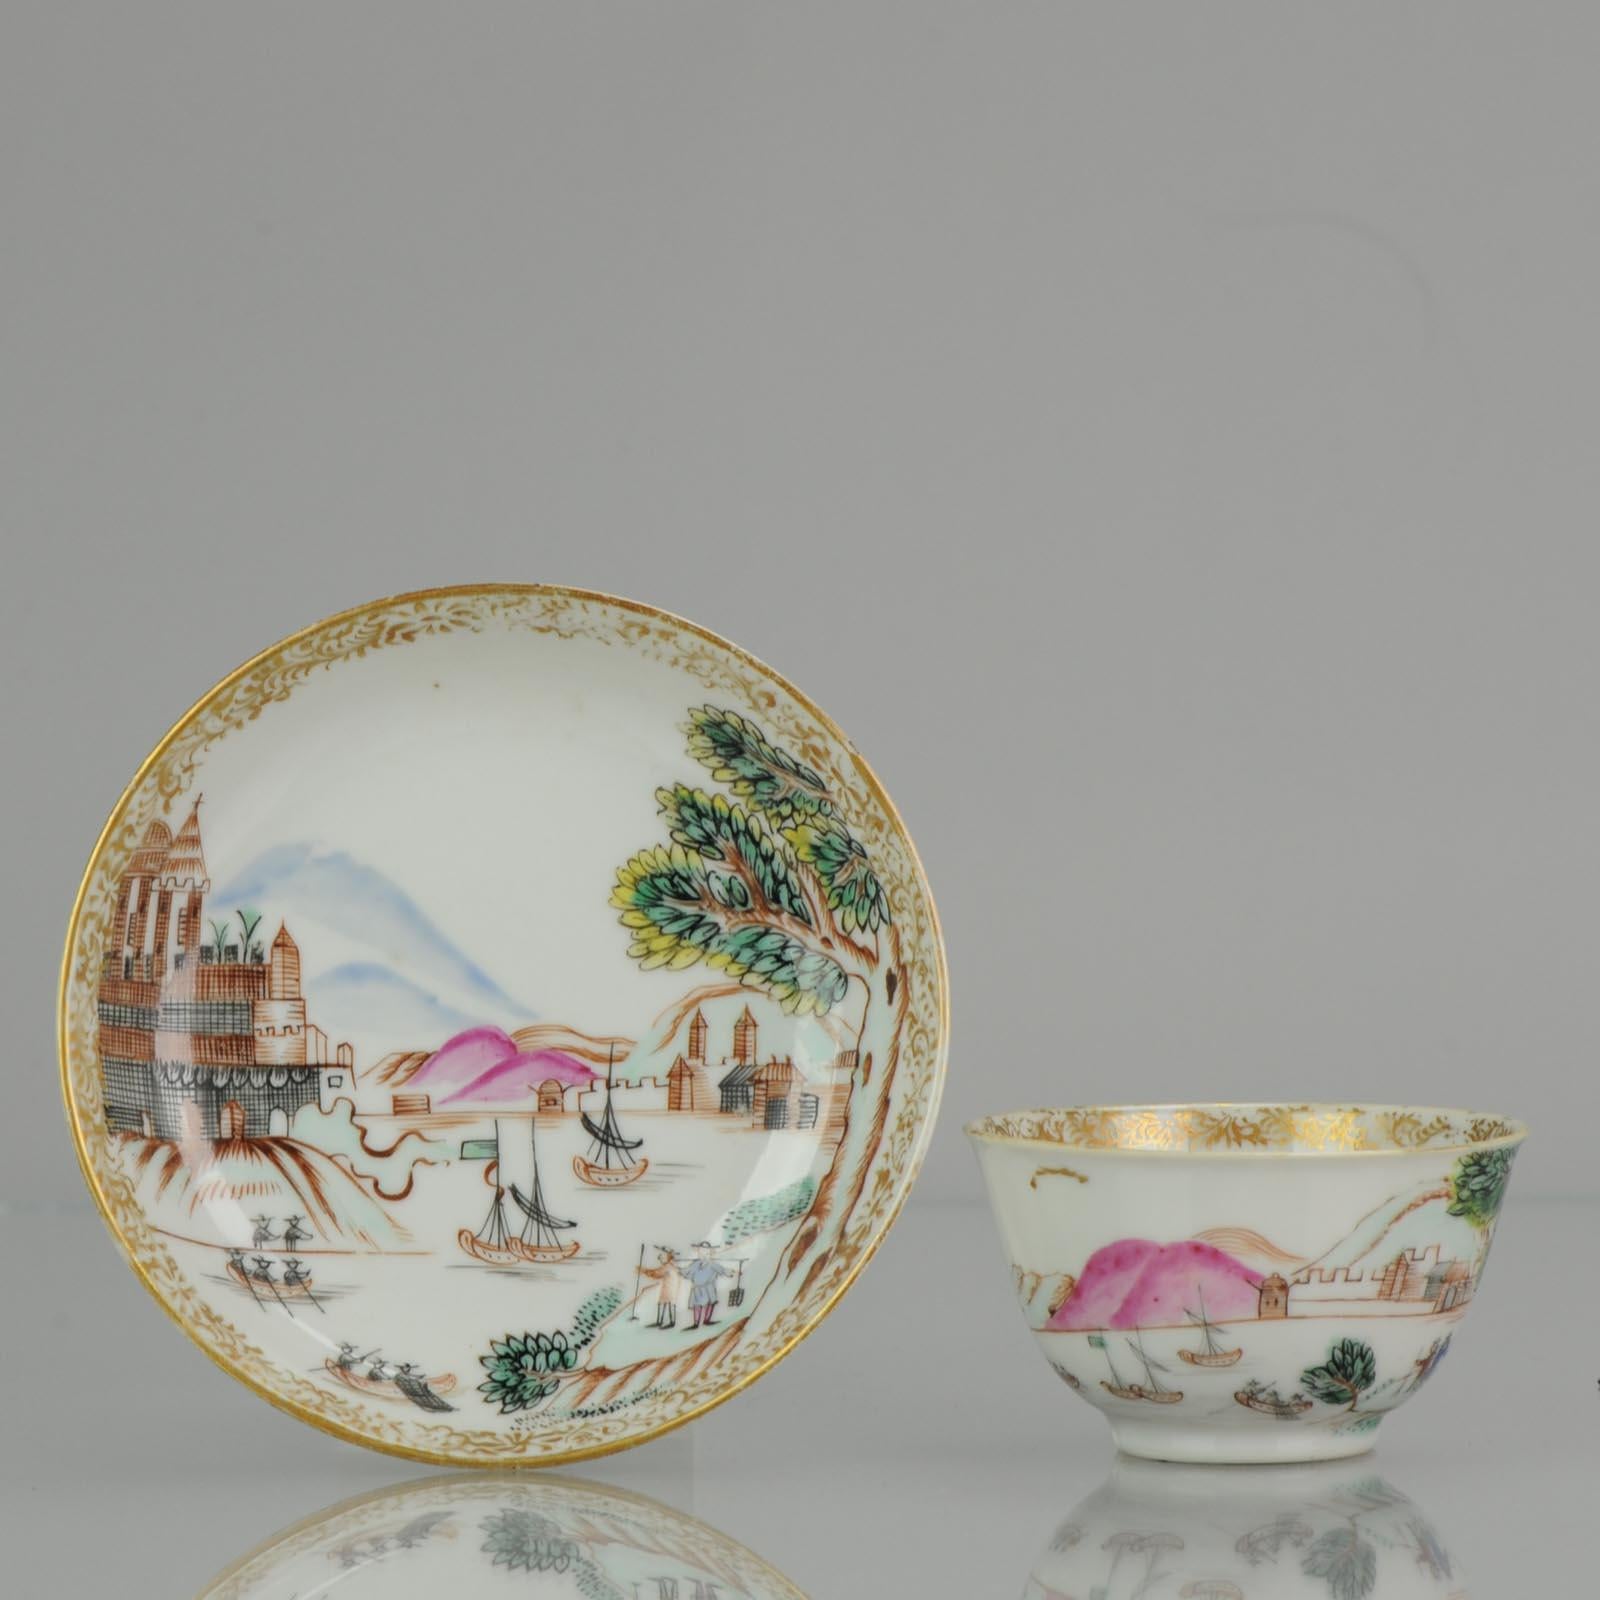 China,

1750-1775

Measures: Height of teacup 43 mm (1.69 inch), diameter of rim 76 mm (2.99 inch), diameter of foot ring 34 mm (1.33 inch).

Height of saucer 23 mm (0.91 inch), diameter of rim 120 mm (4.72 inch), diameter of foot ring 72 mm